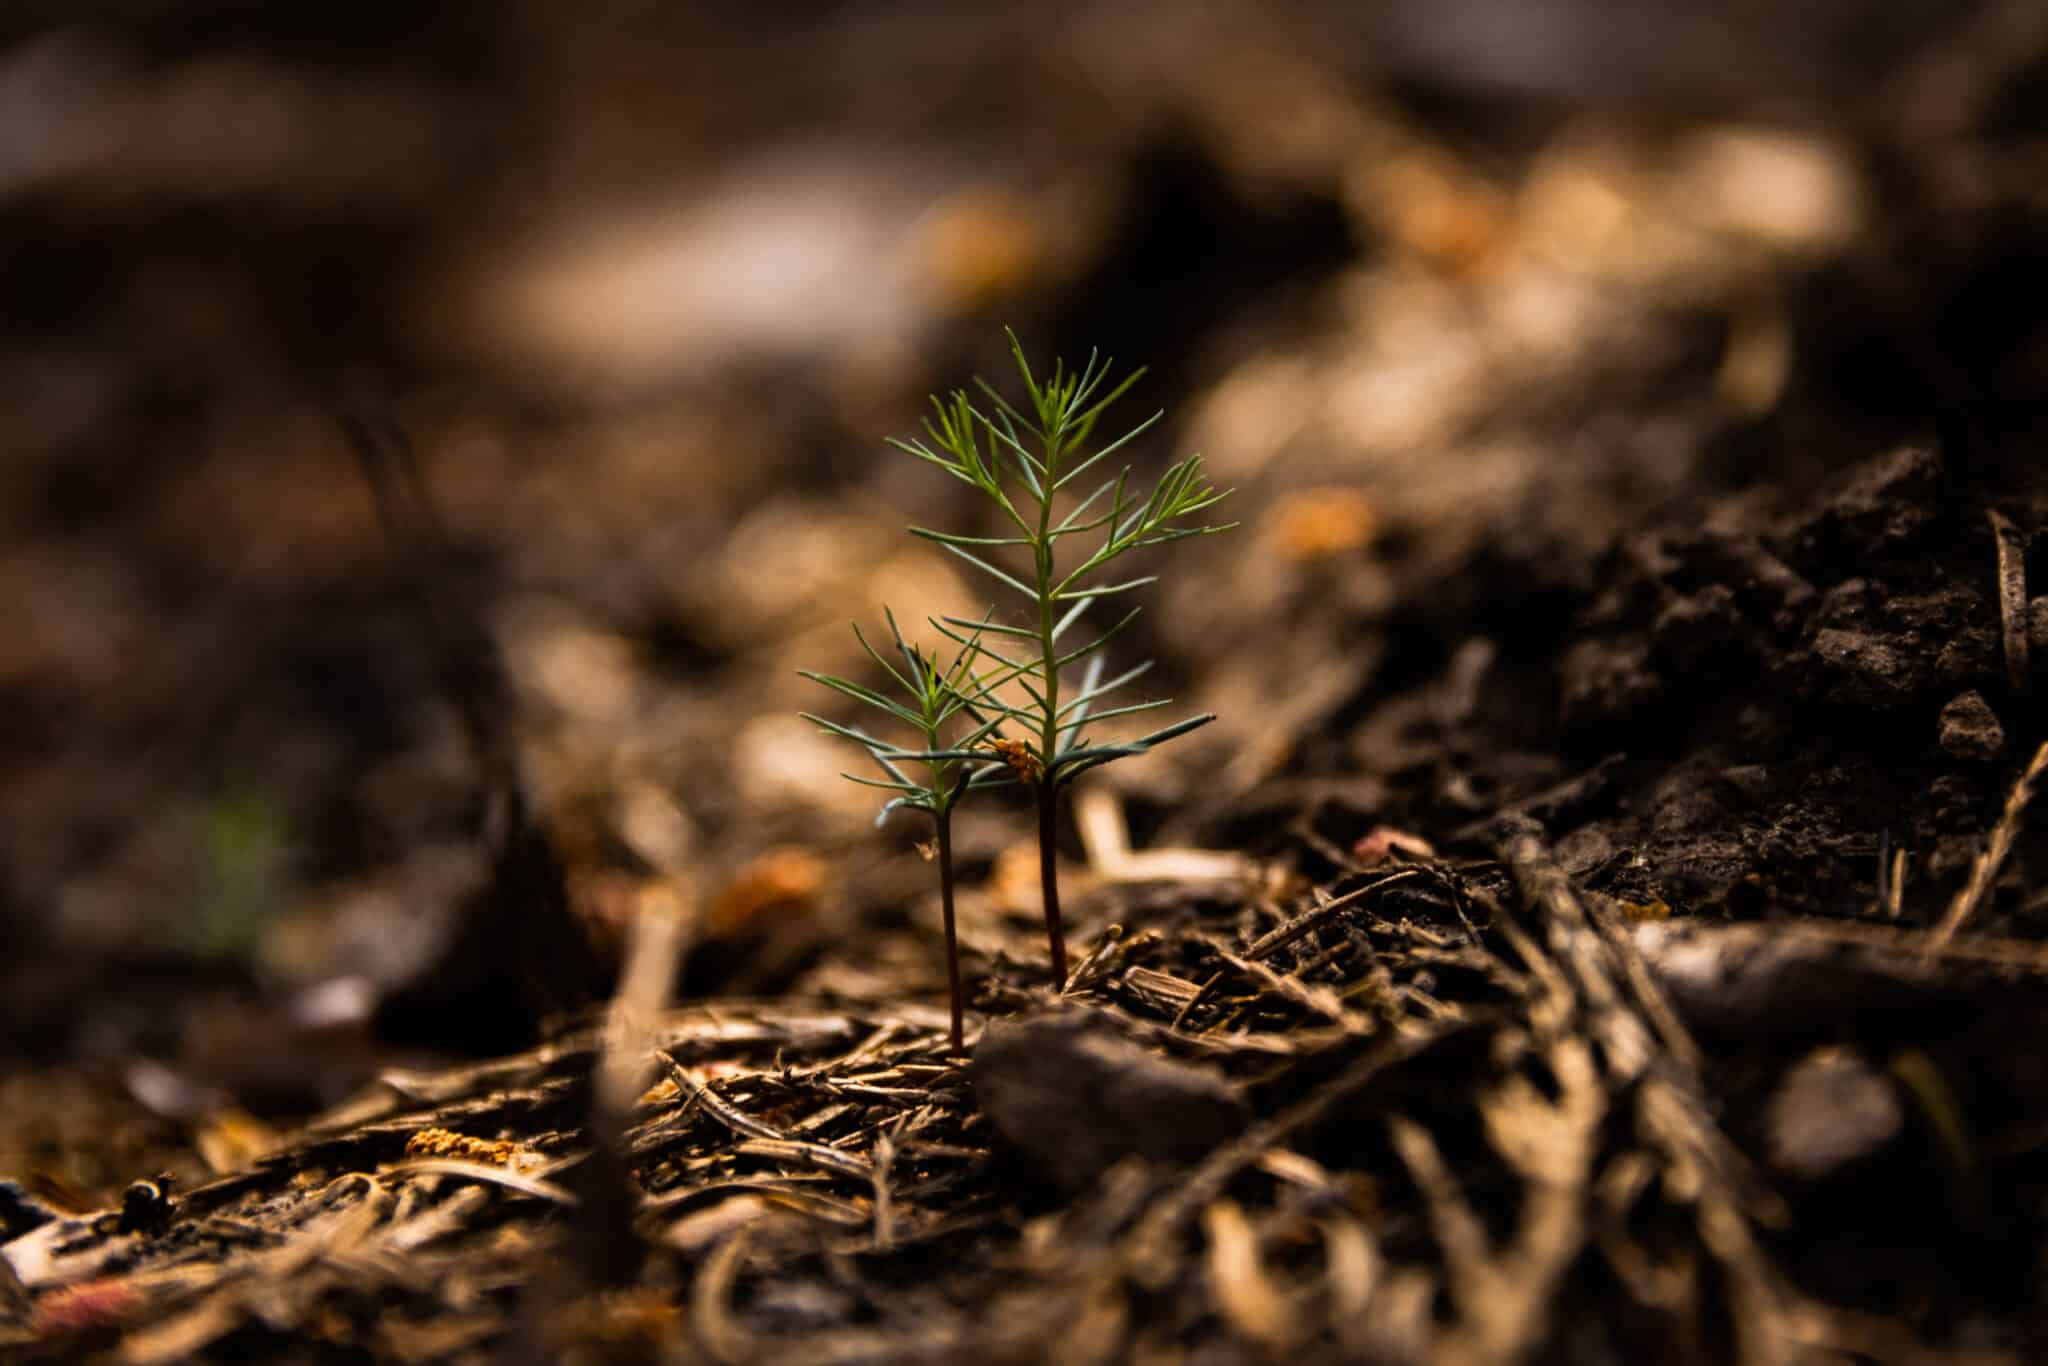 New sequoia seedlings grow at Alder Creek. Photo by Max Whittaker.